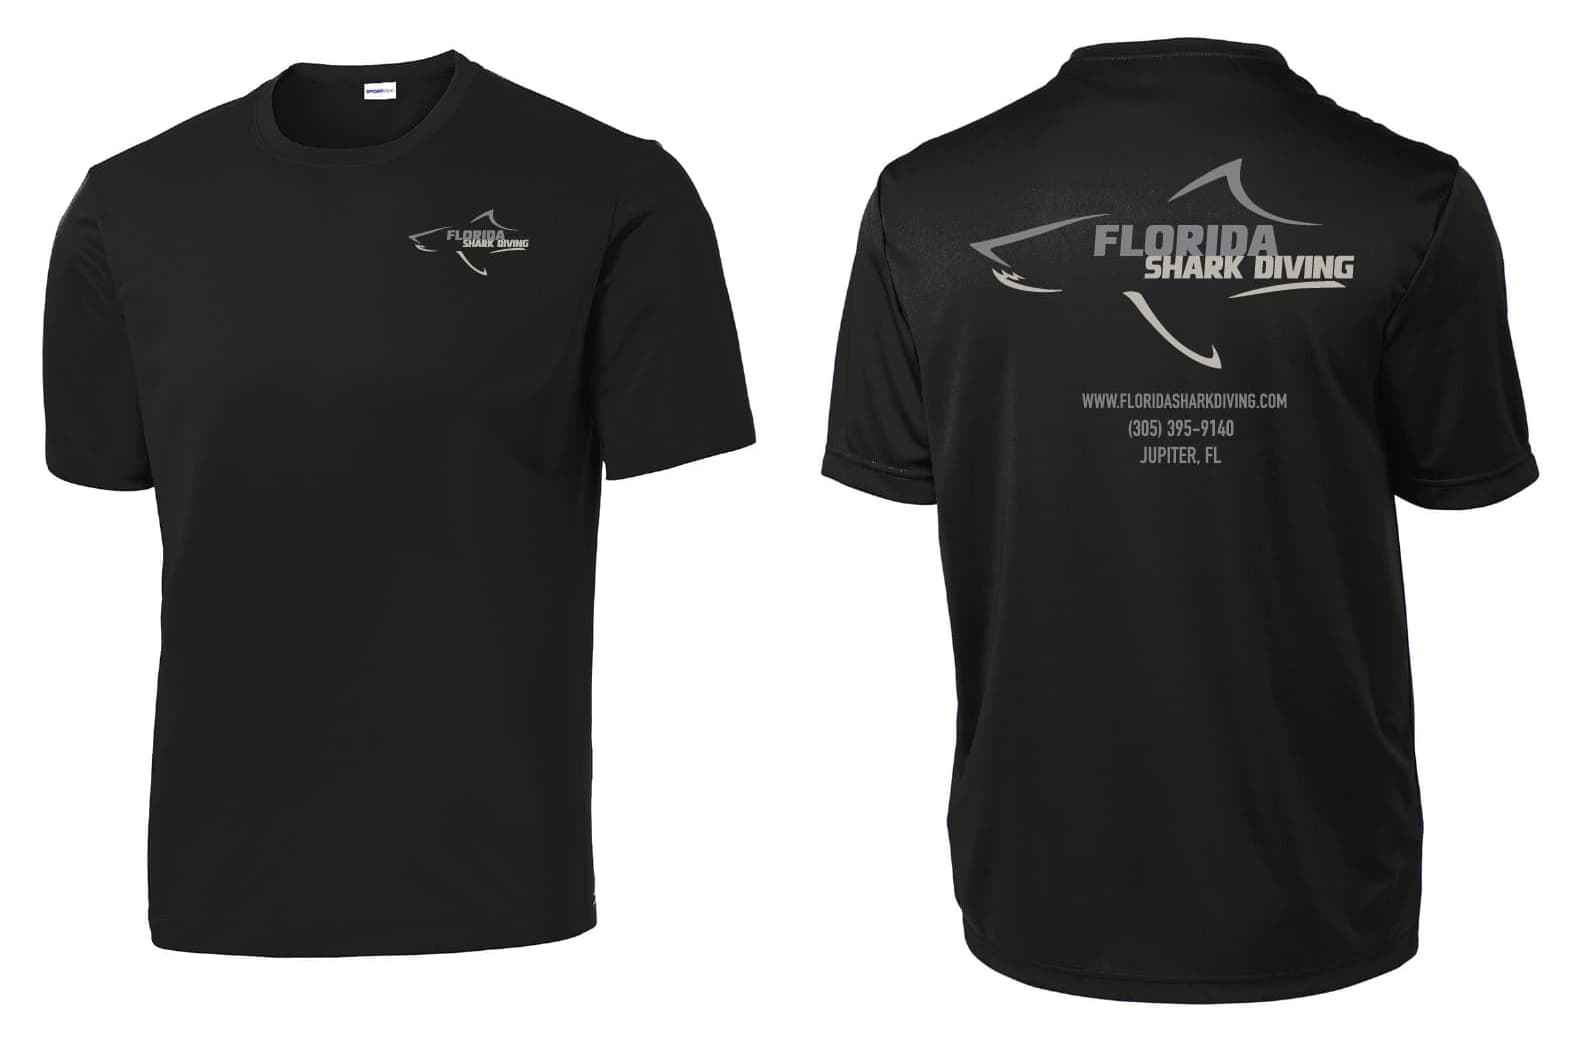 An image of the Florida Shark Diving tshirts available so you can be a part of our crew!